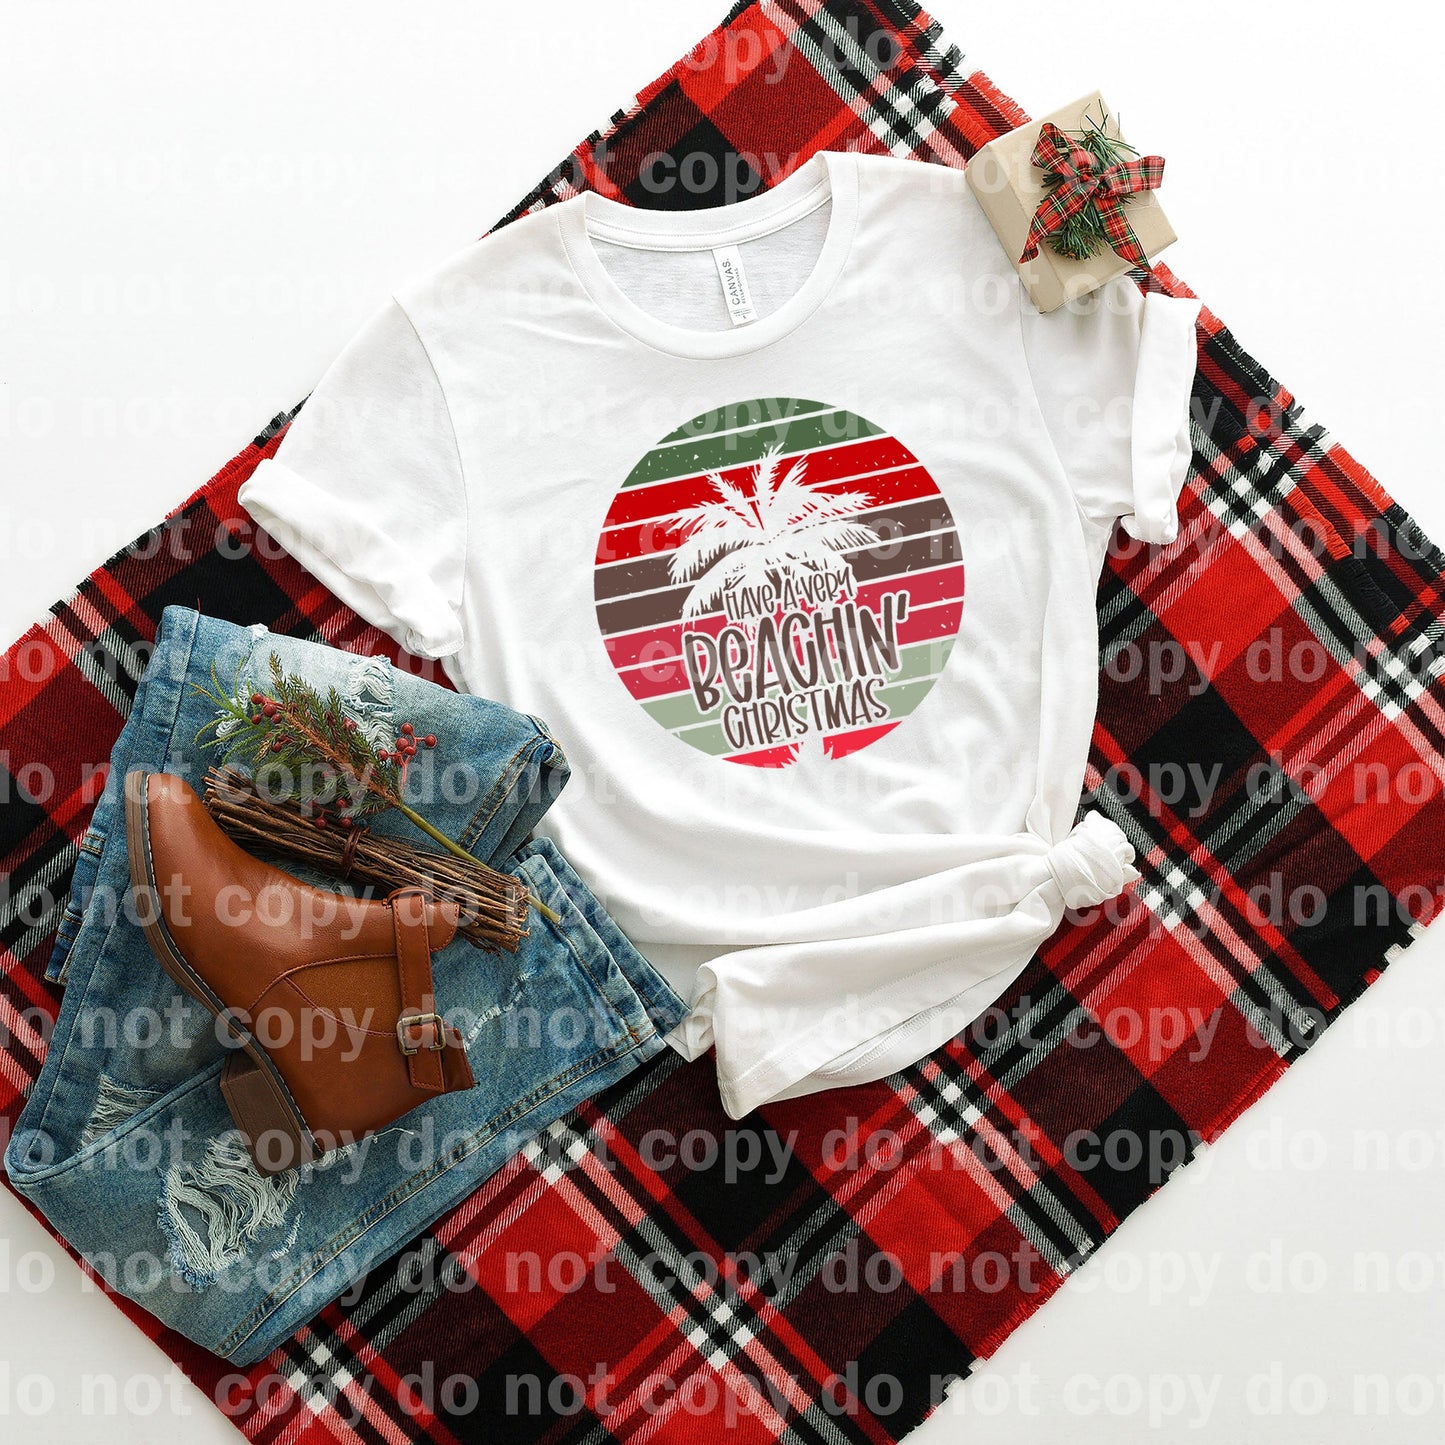 Have A Very Beachin' Christmas Dream Print or Sublimation Print